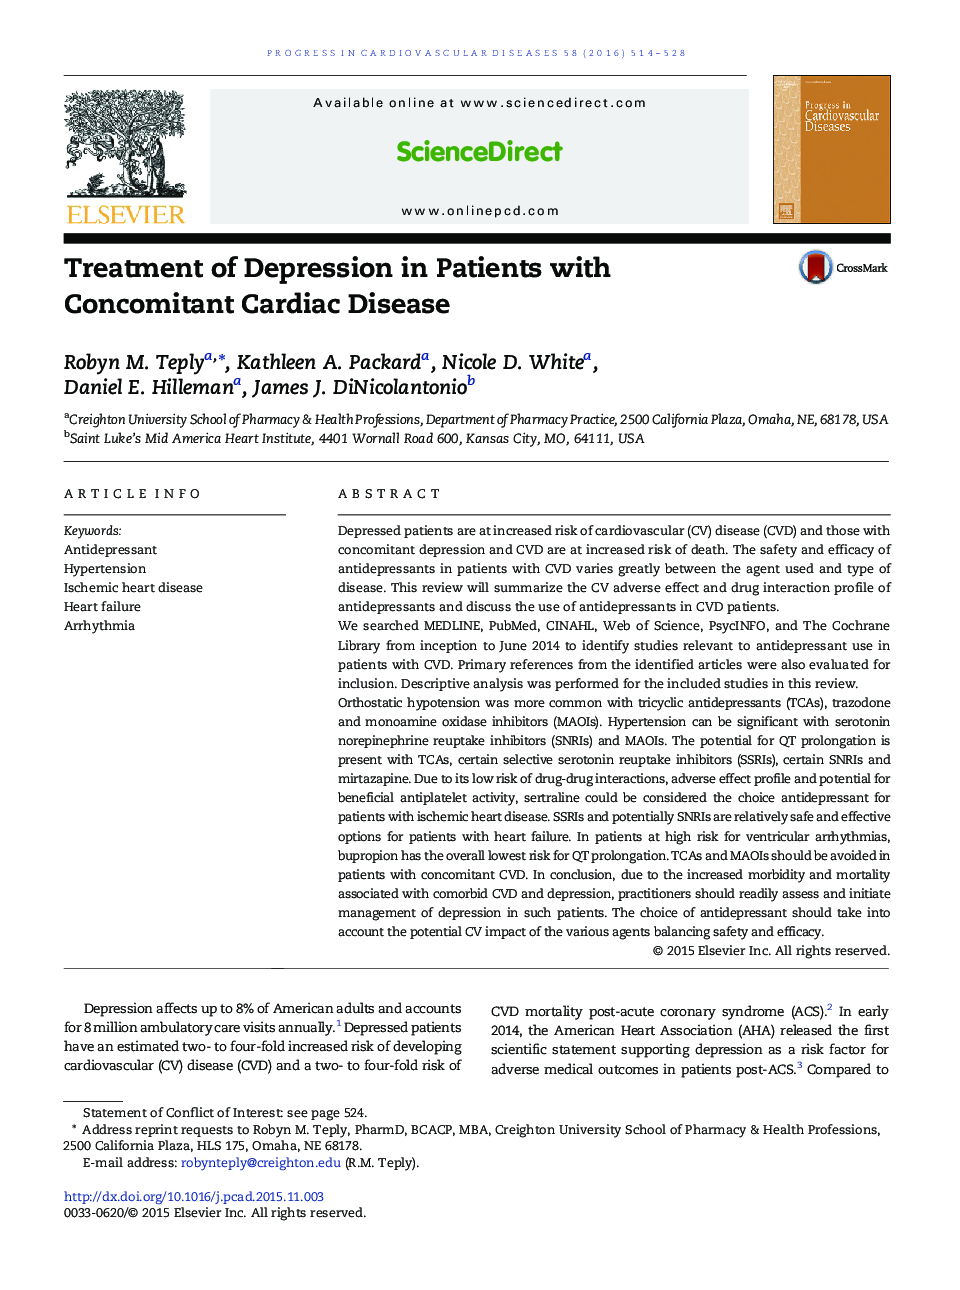 Treatment of Depression in Patients with Concomitant Cardiac Disease 